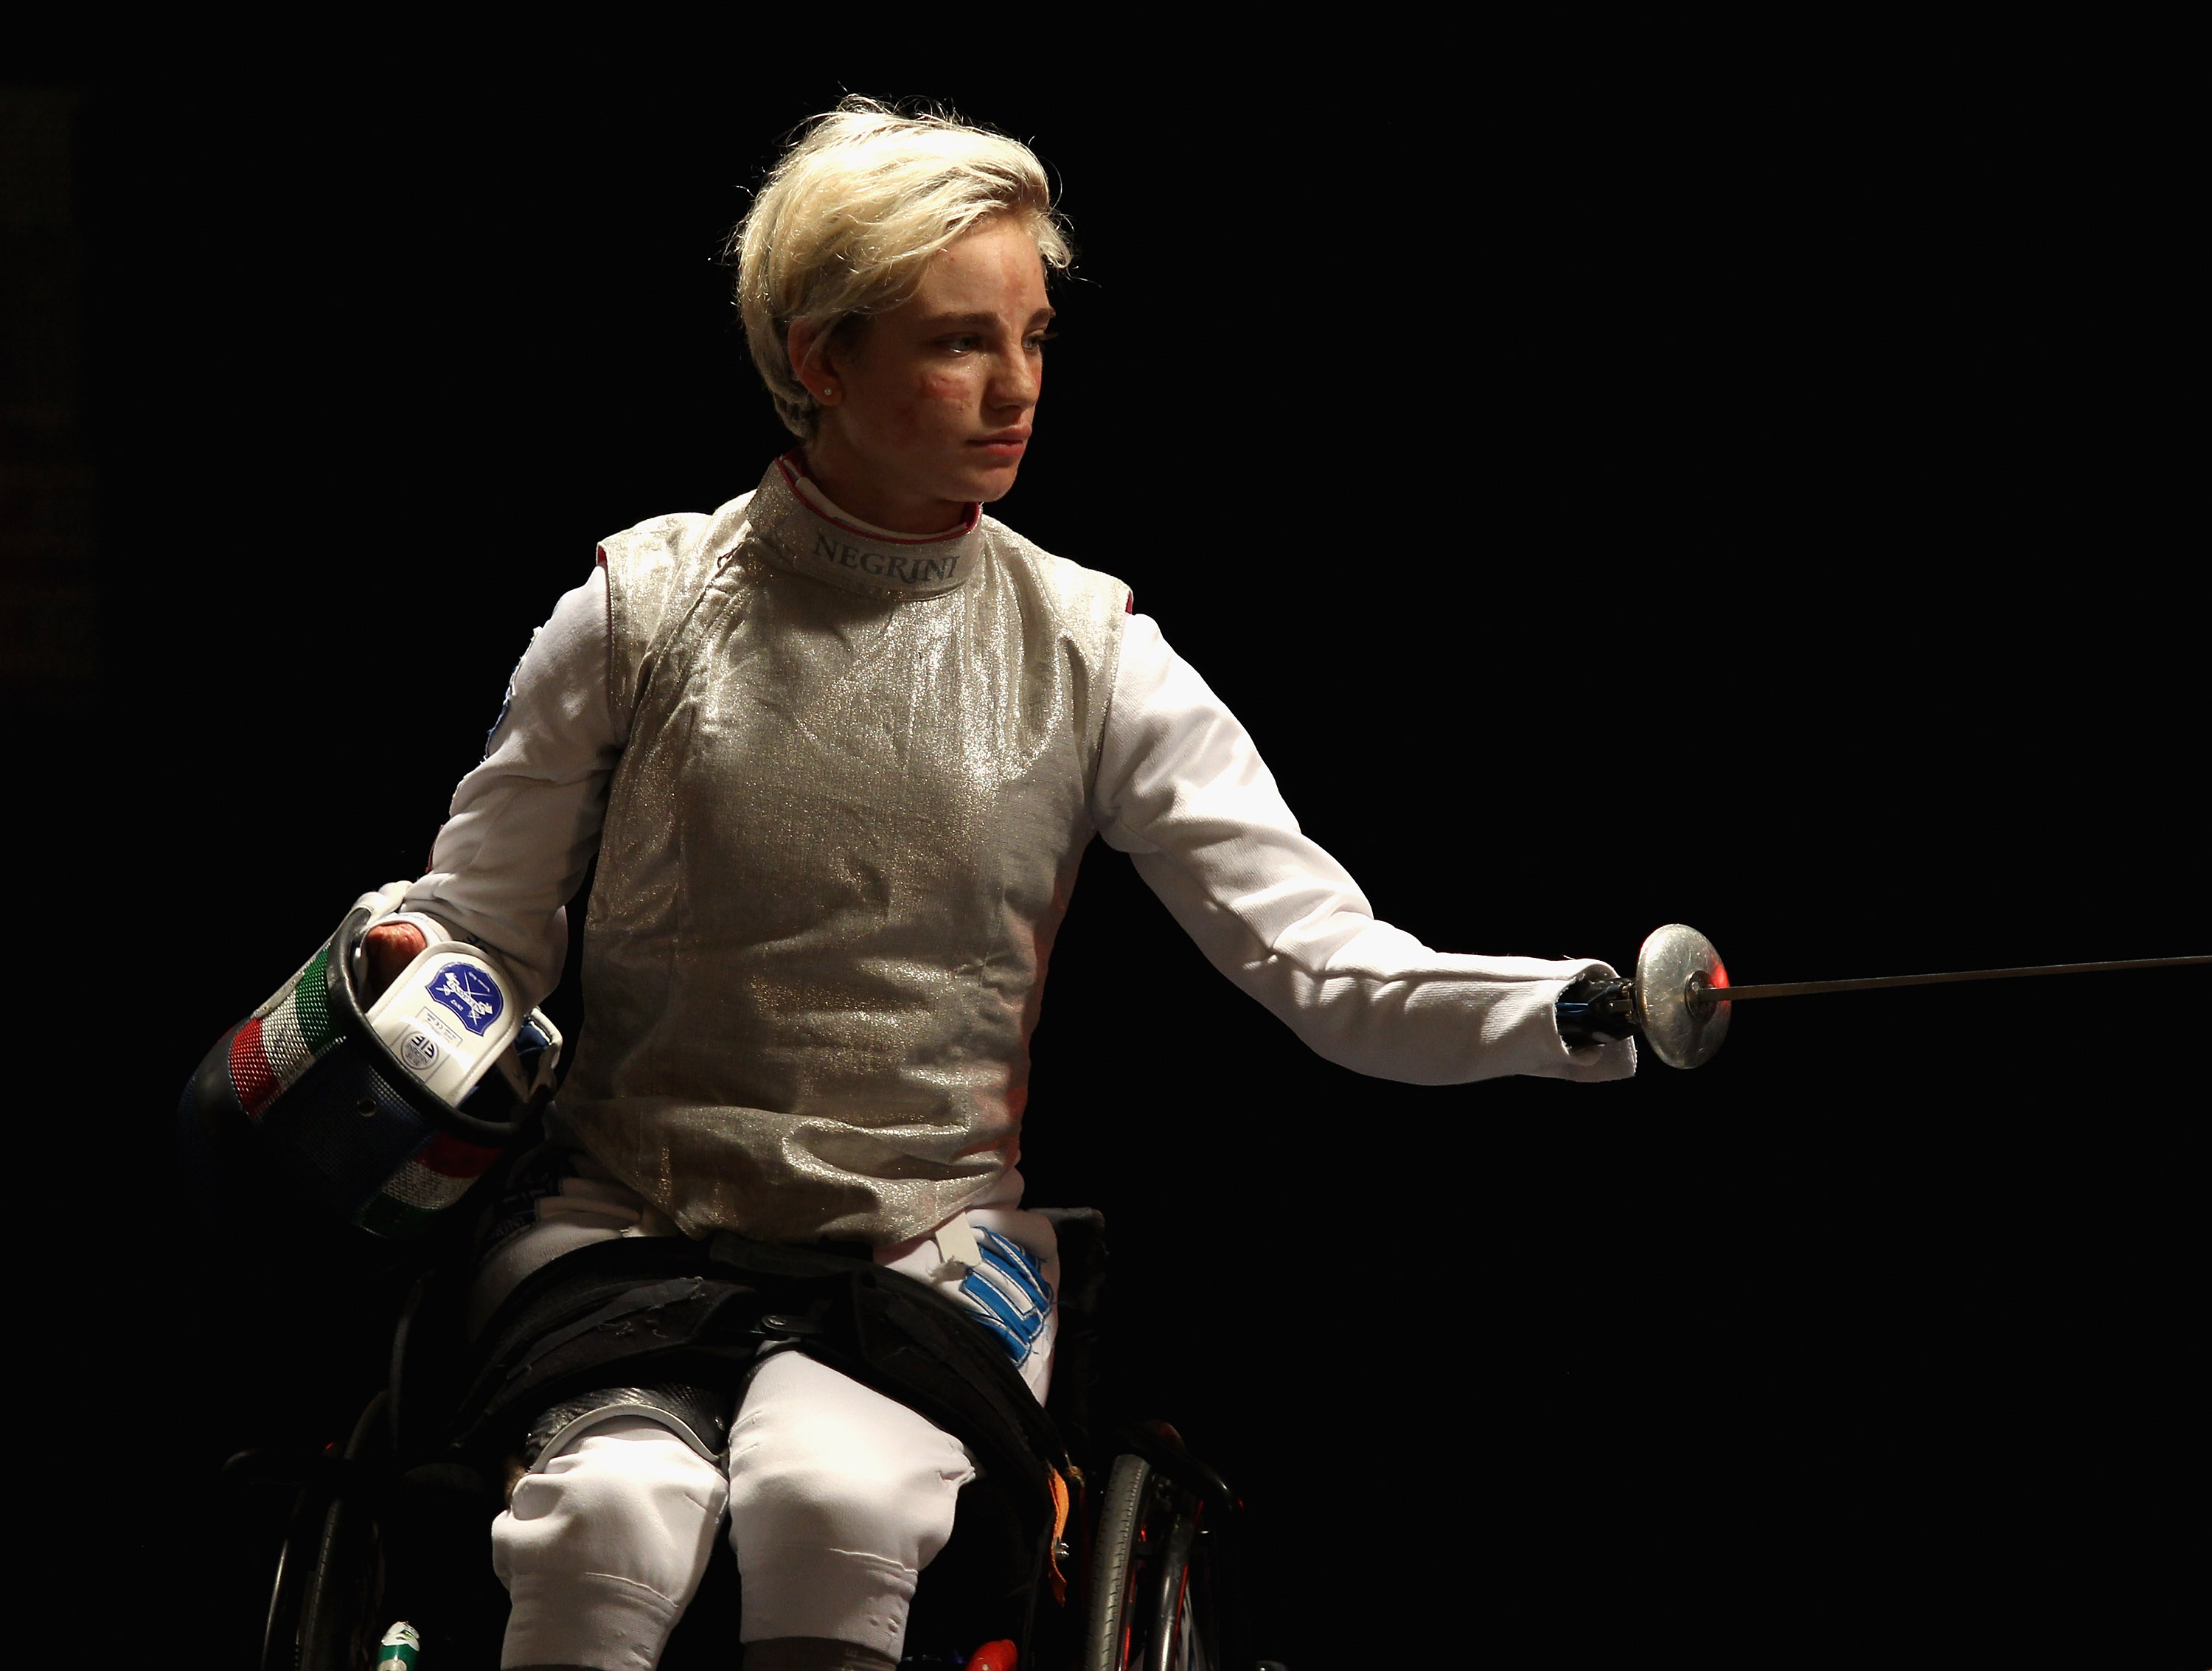 Warsaw wins for wheelchair fencing world champions | International